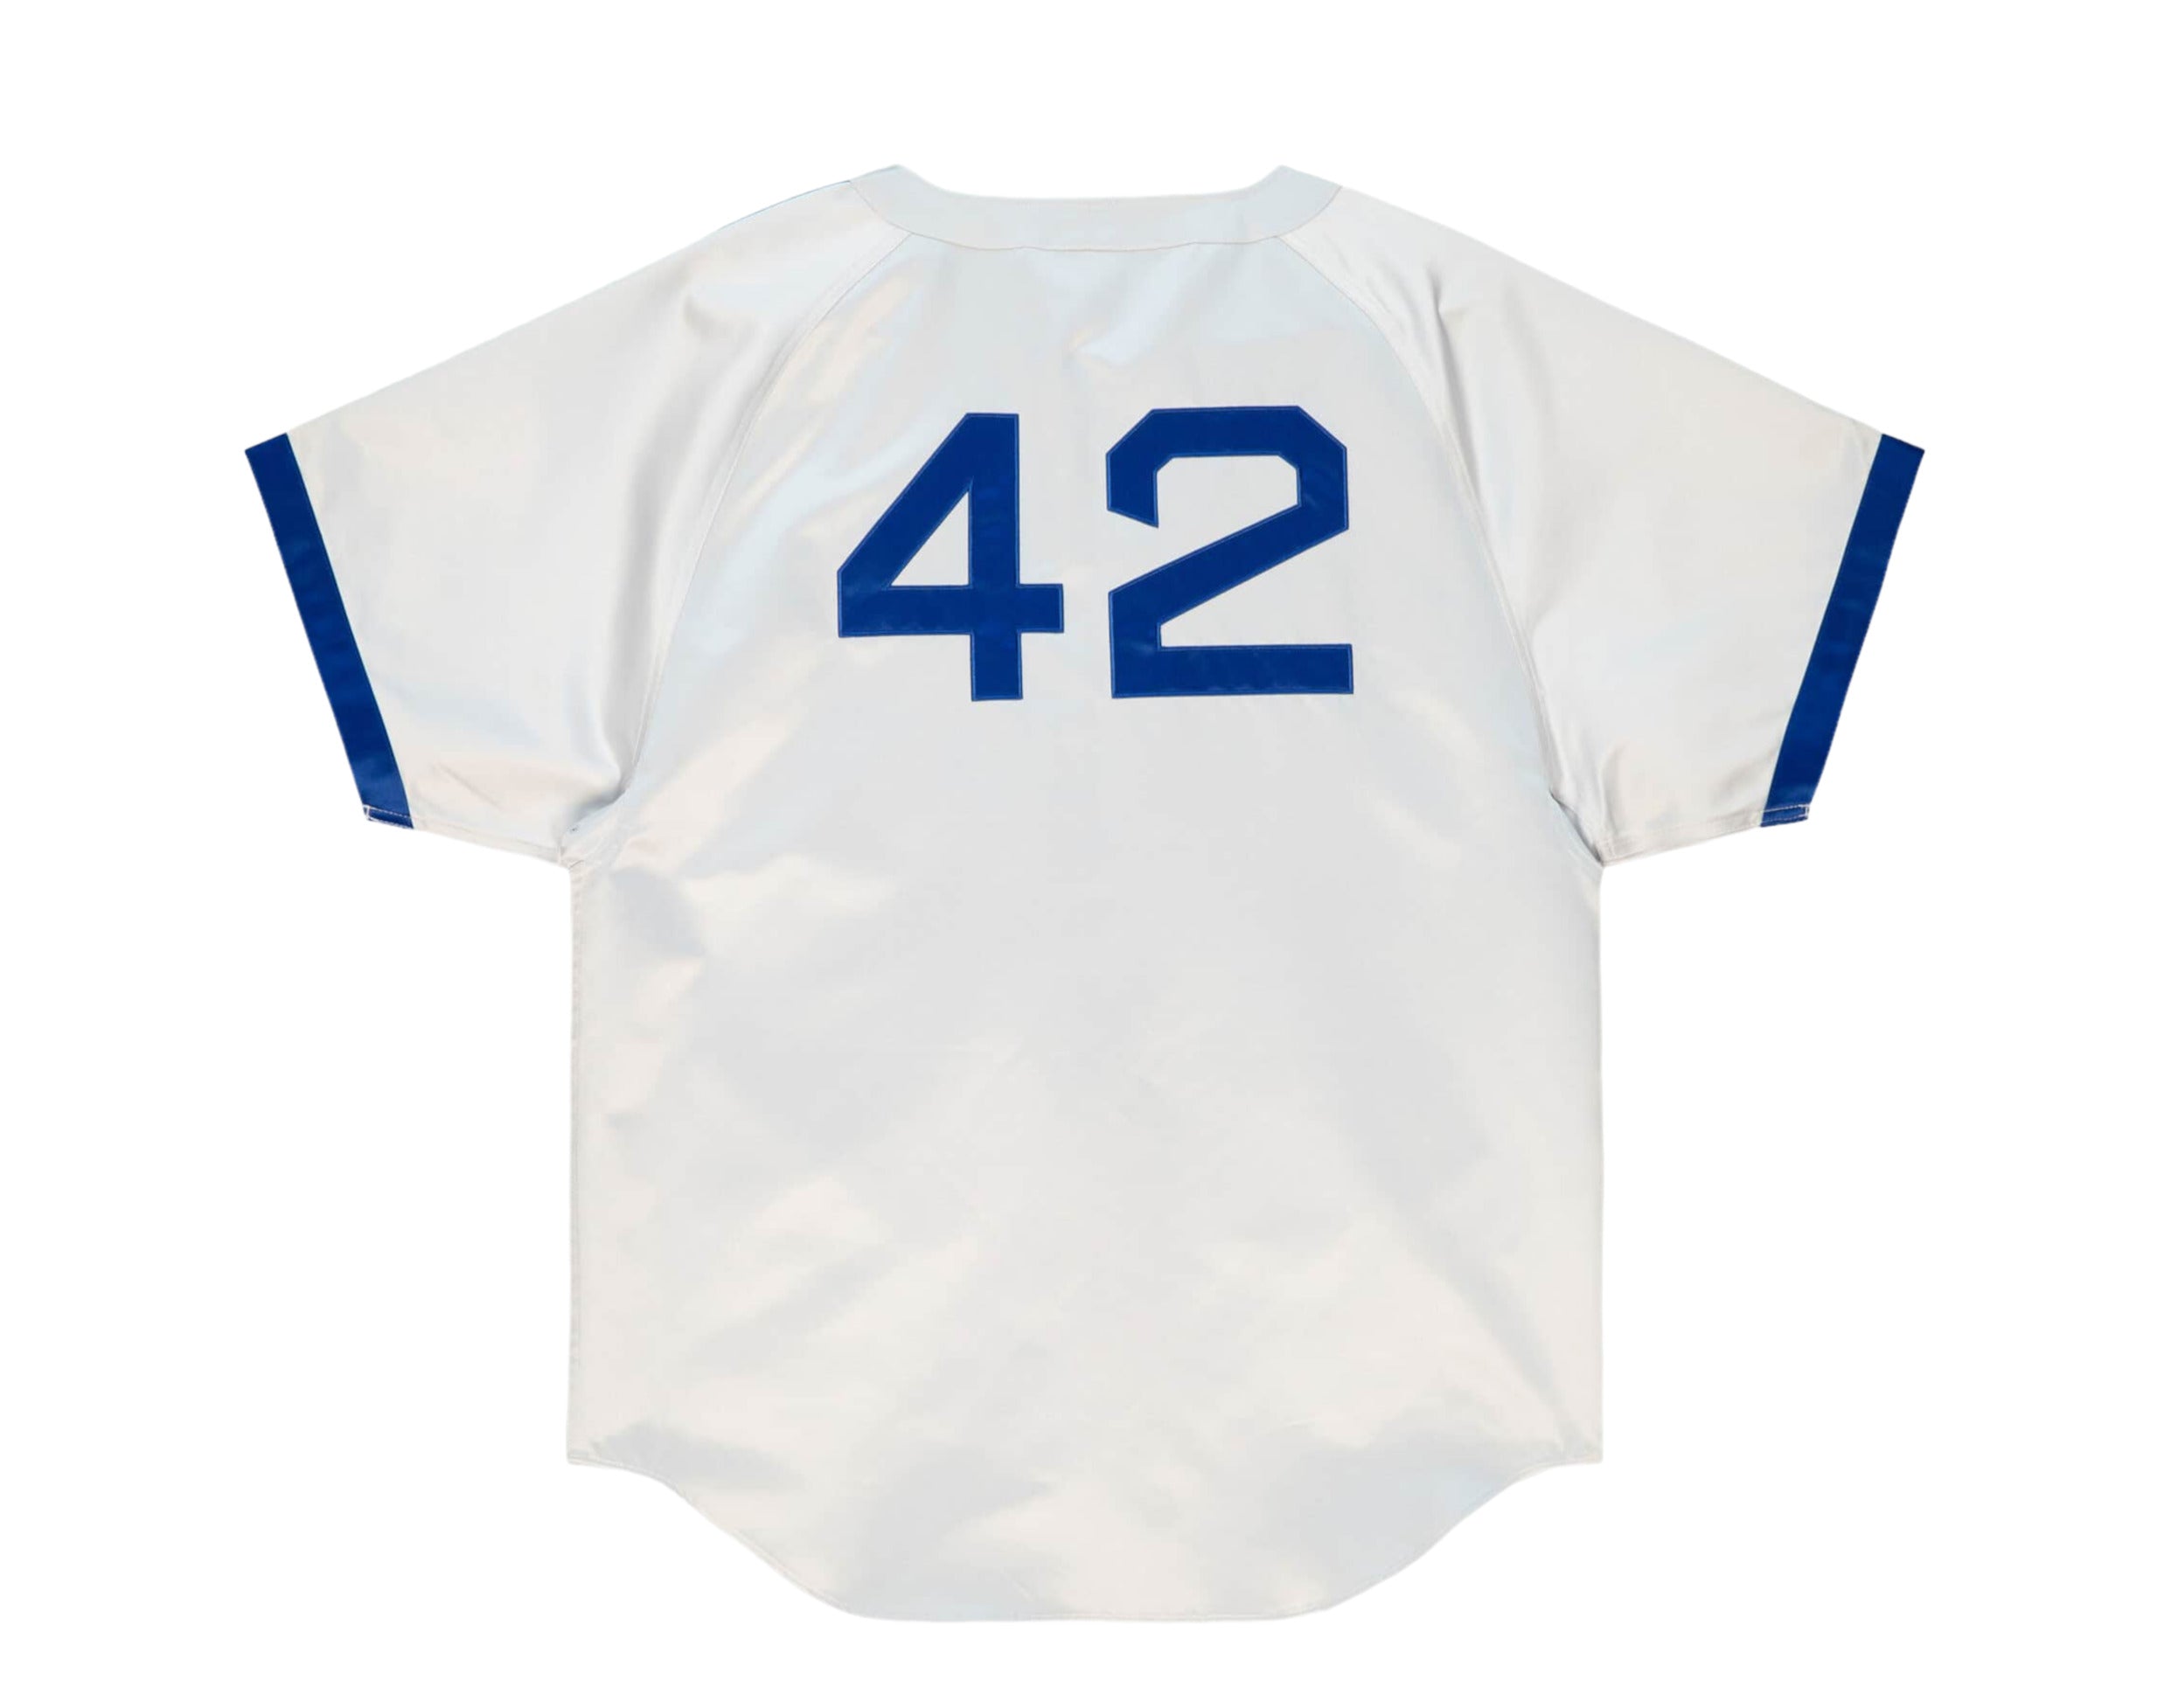 Jackie Robinson Cooperstown Brooklyn Jersey